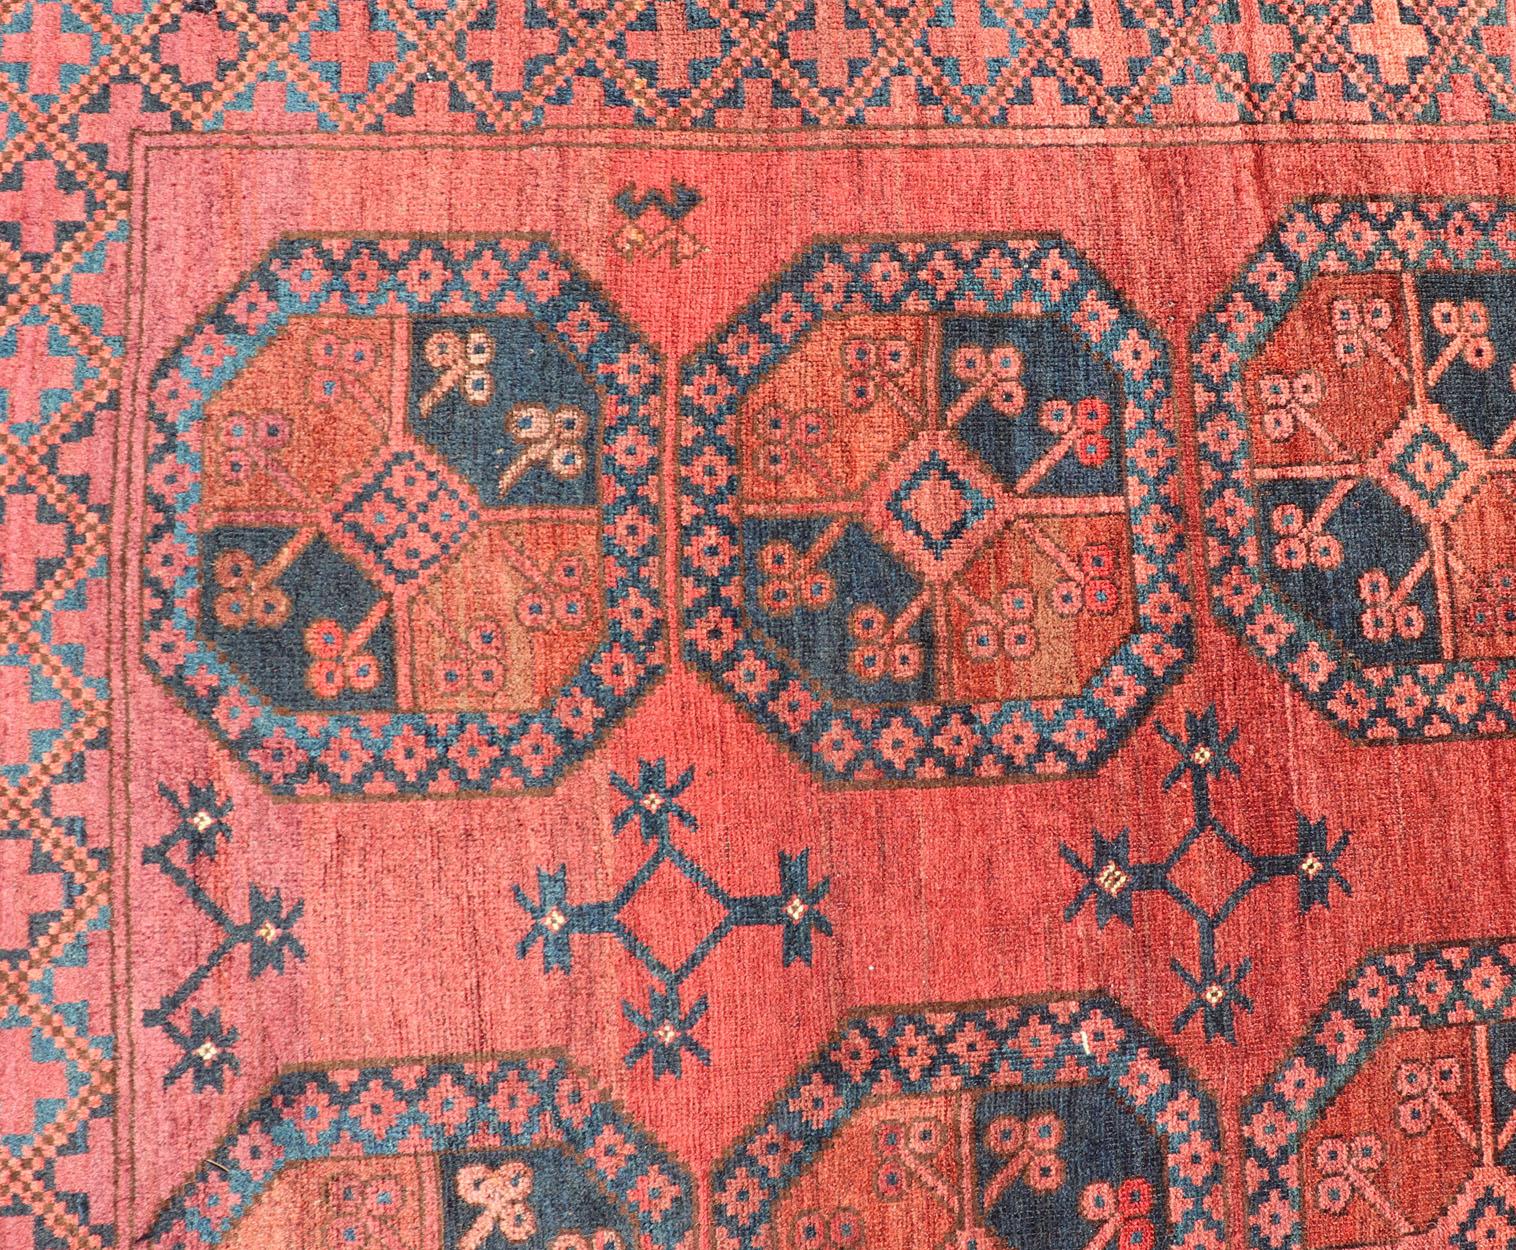 Hand-Knotted Turkomen Ersari Rug in Wool with Gul Design in Red, Orange and Blue For Sale 8